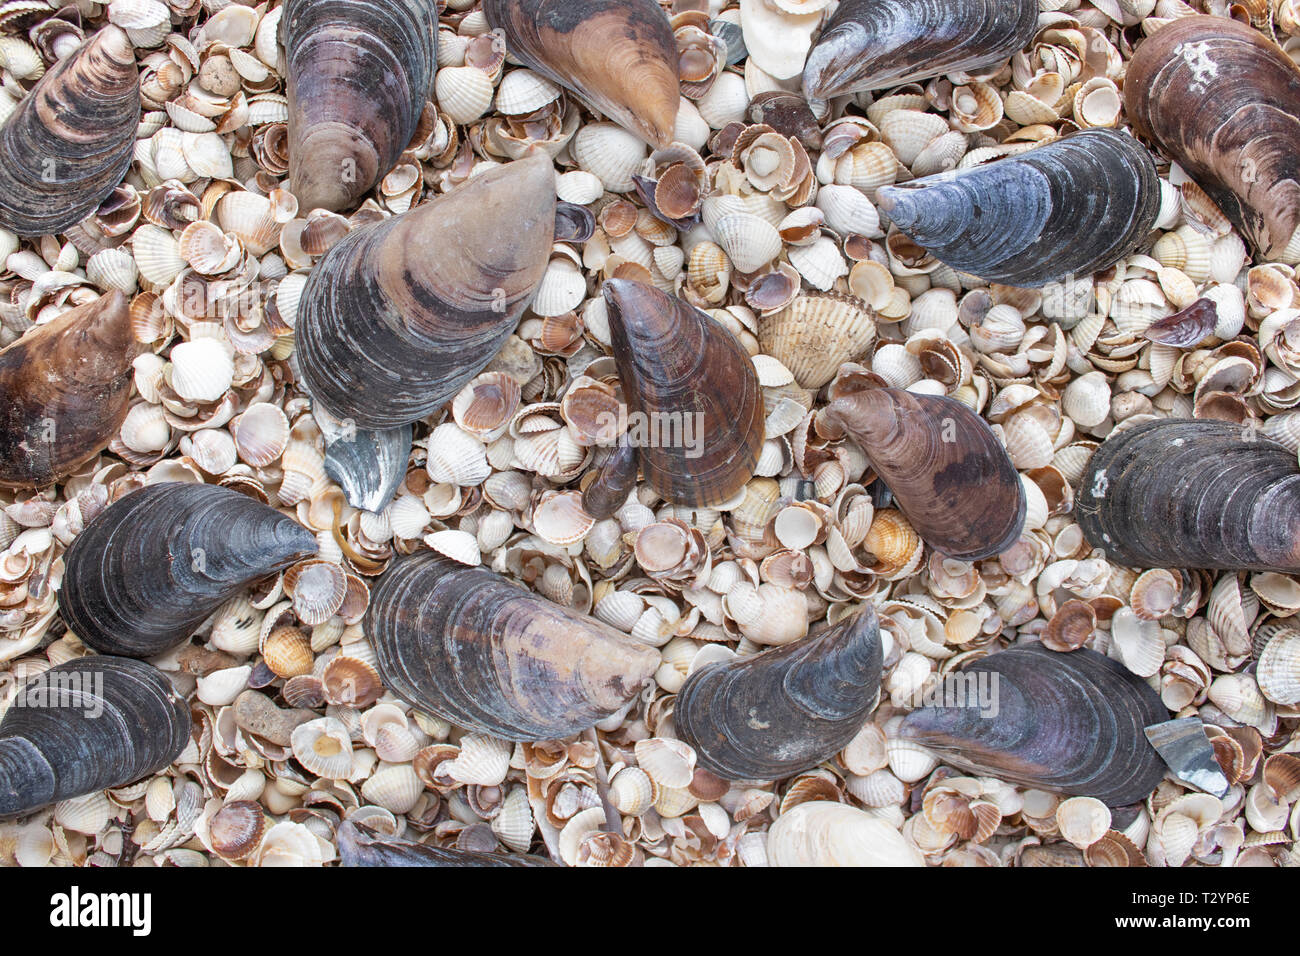 Seashells of different colors. Mollusk shells. Seashell background. Texture of the shells. Stock Photo